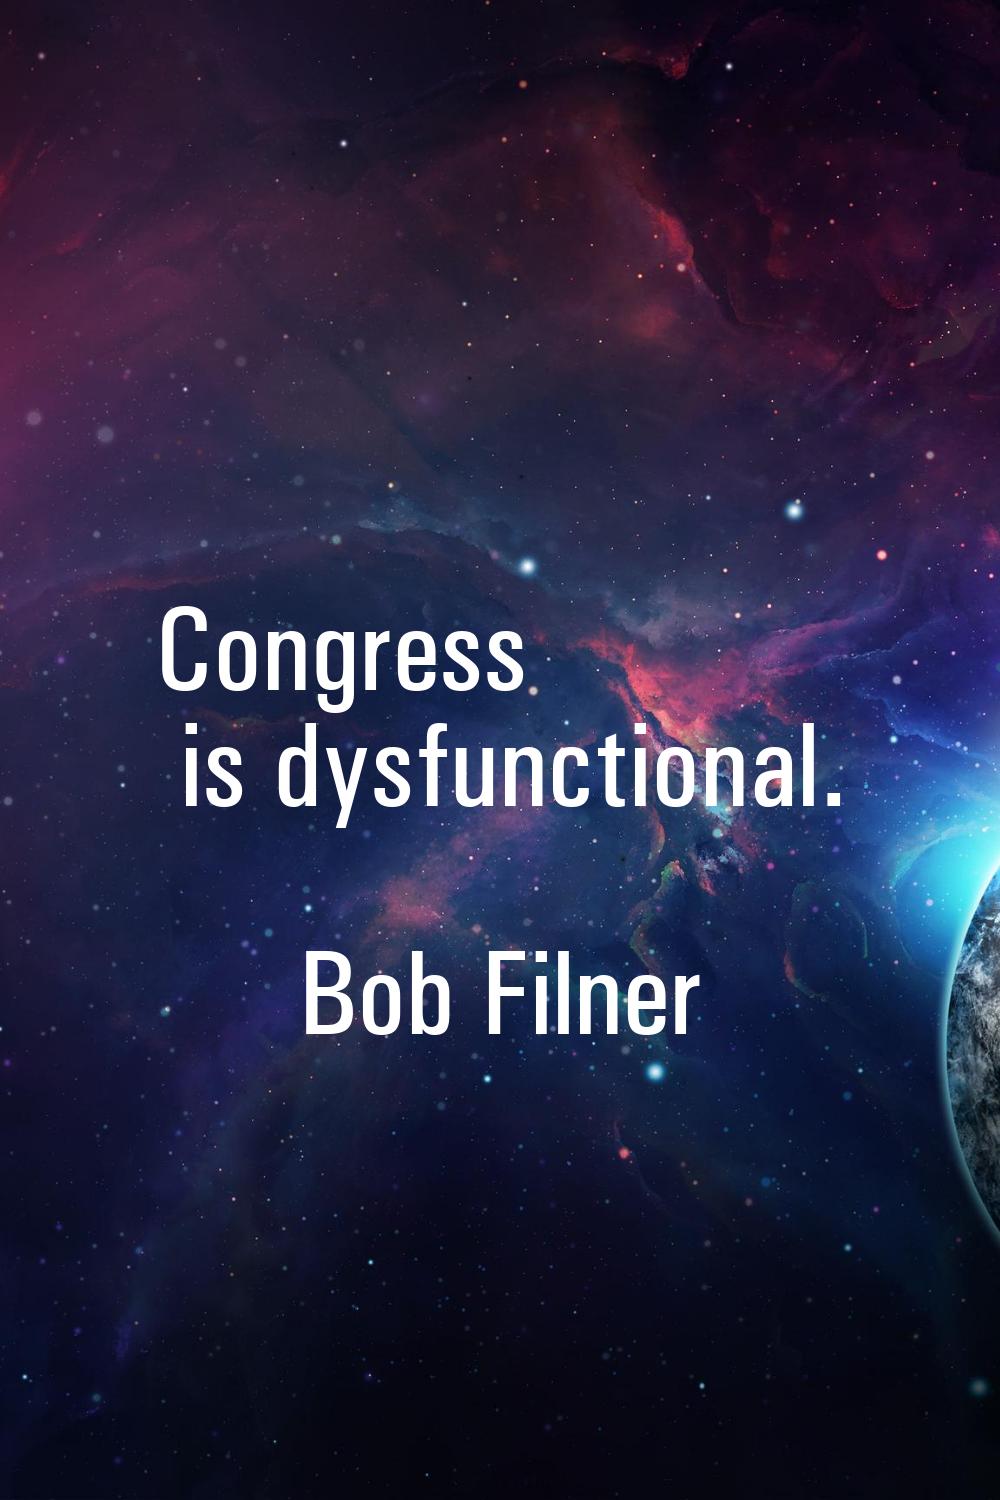 Congress is dysfunctional.